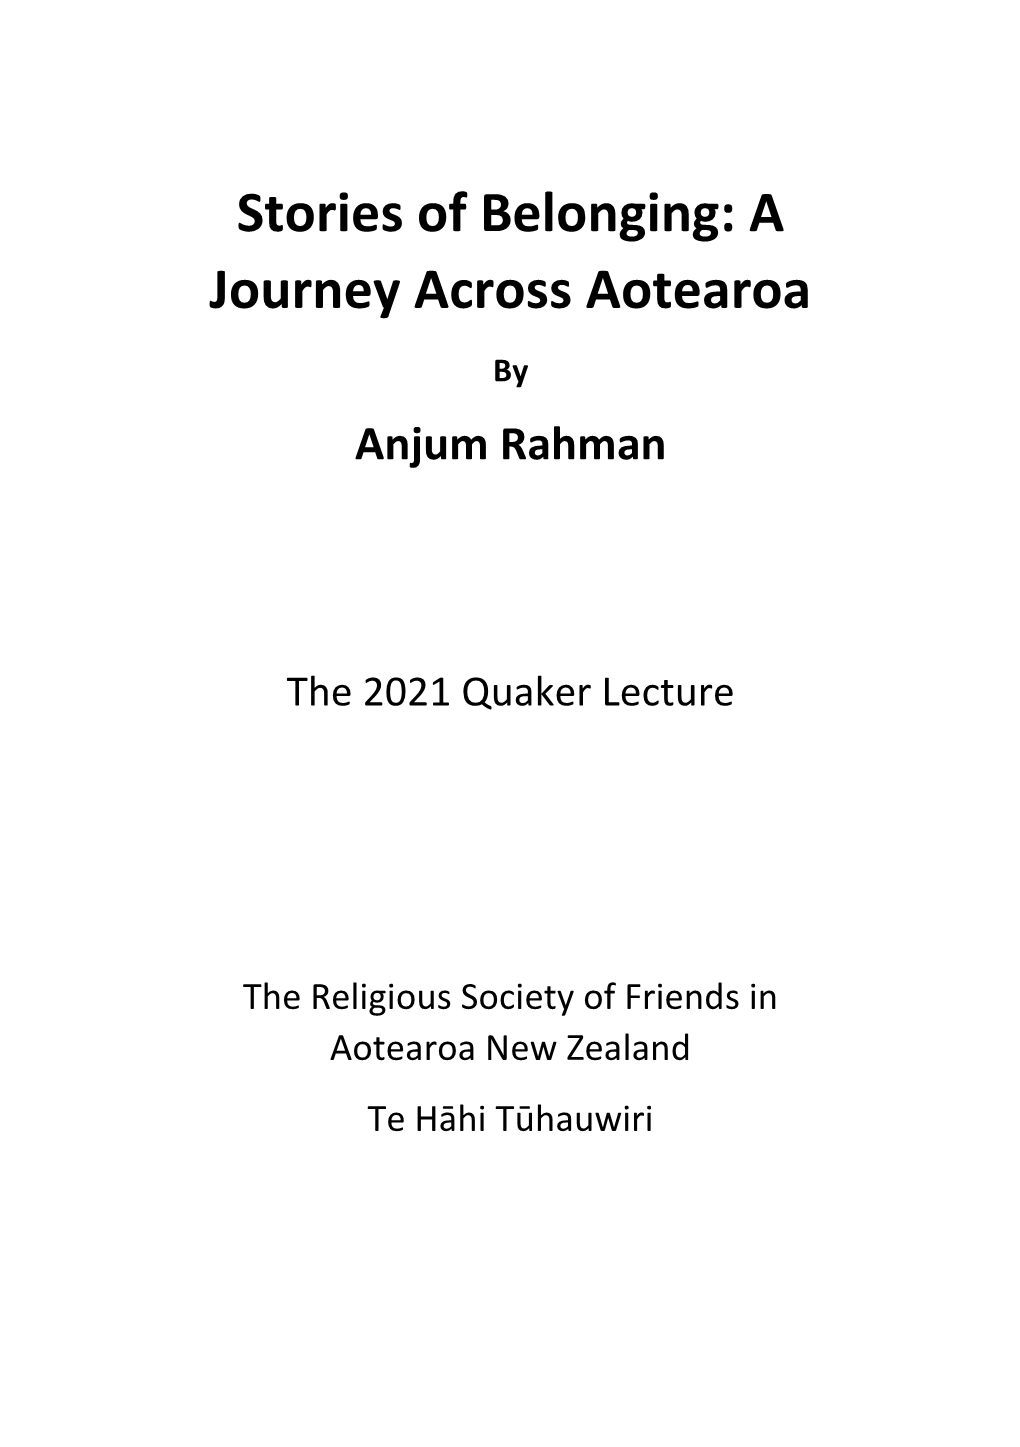 The Pdf Copy of the Quaker Lecture Presented To